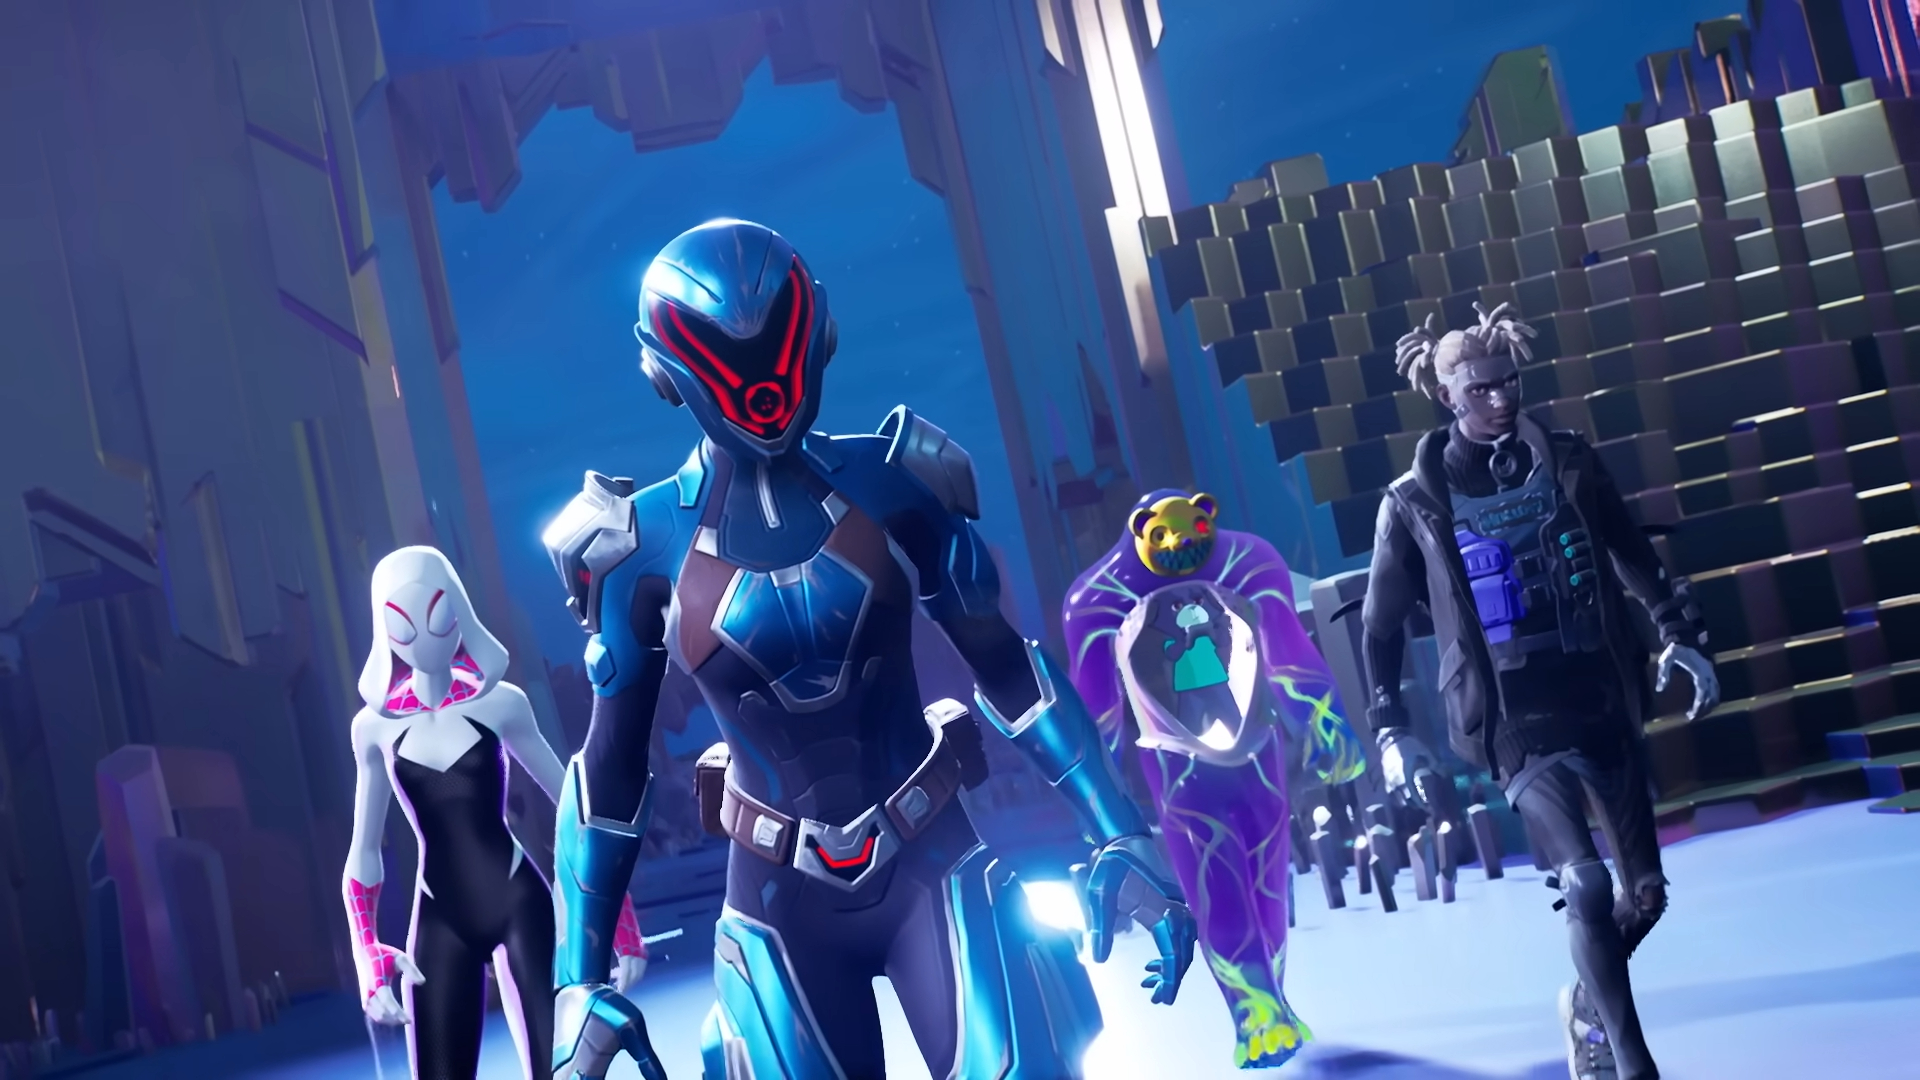 Fortnite - Help, Official Site